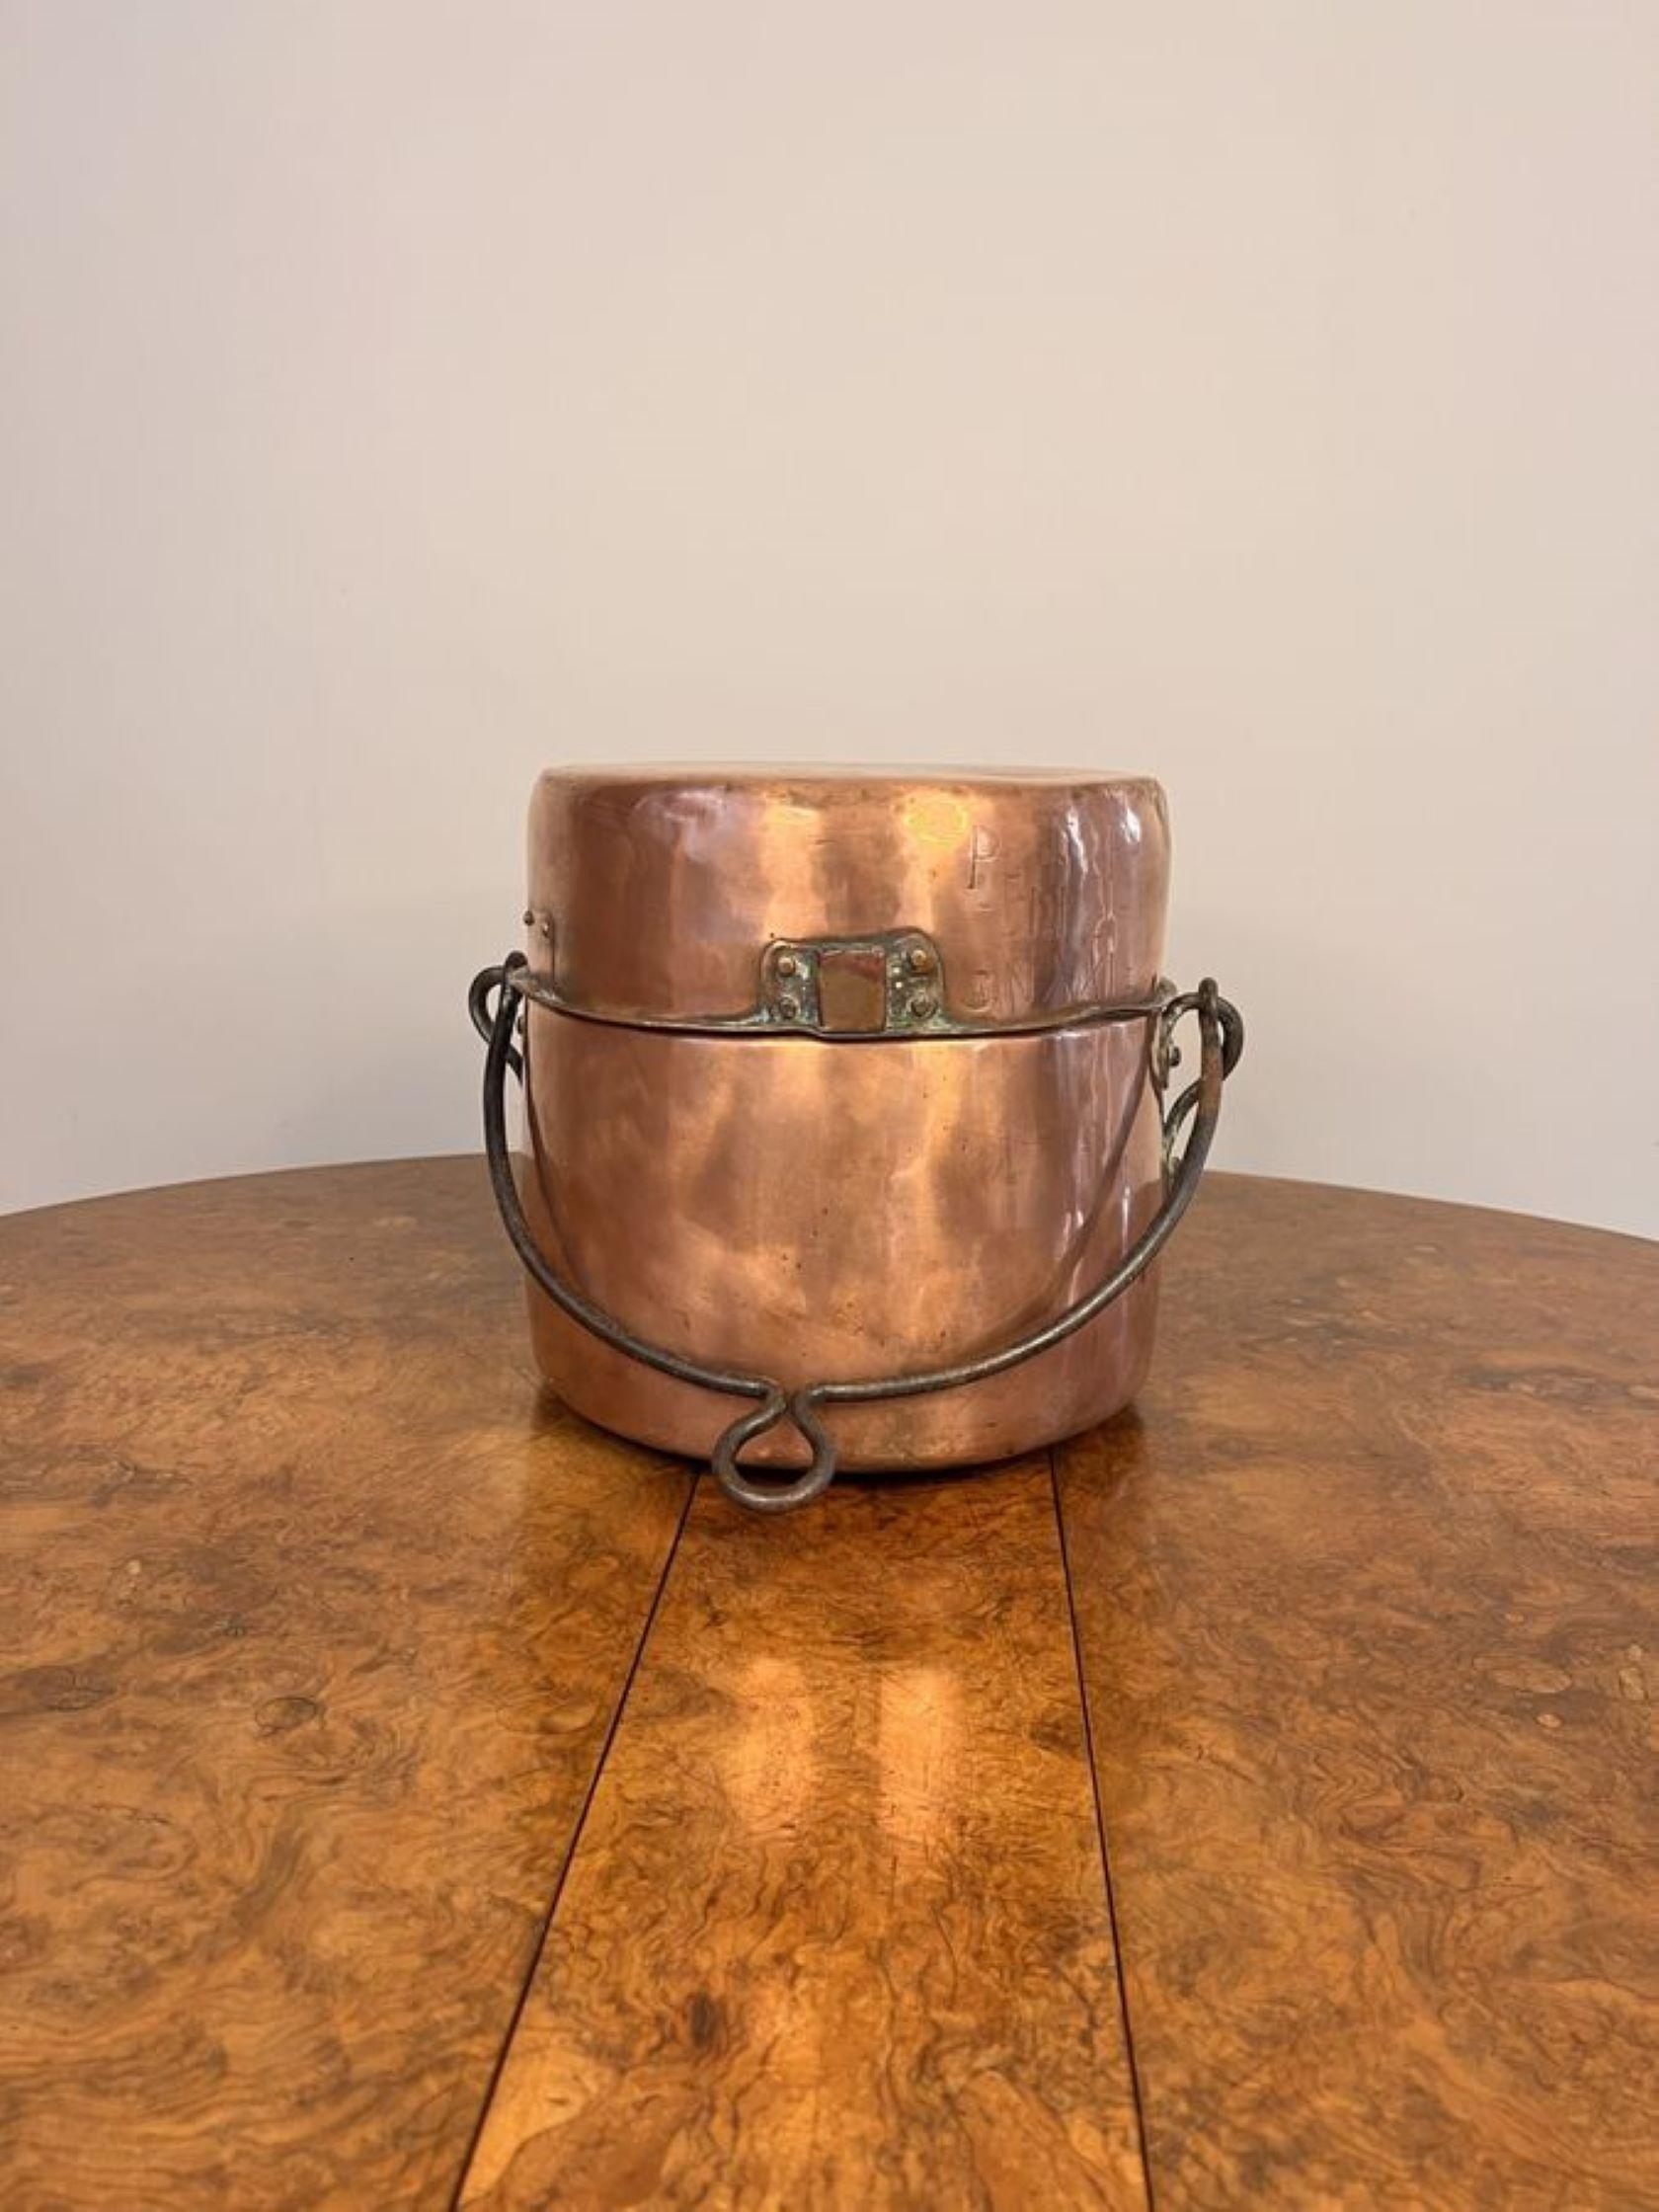 Quality antique George III copper cooking pot, having a iron swing handle and a removable copper lid, to the front PCN stamped 1770.

D. 1770